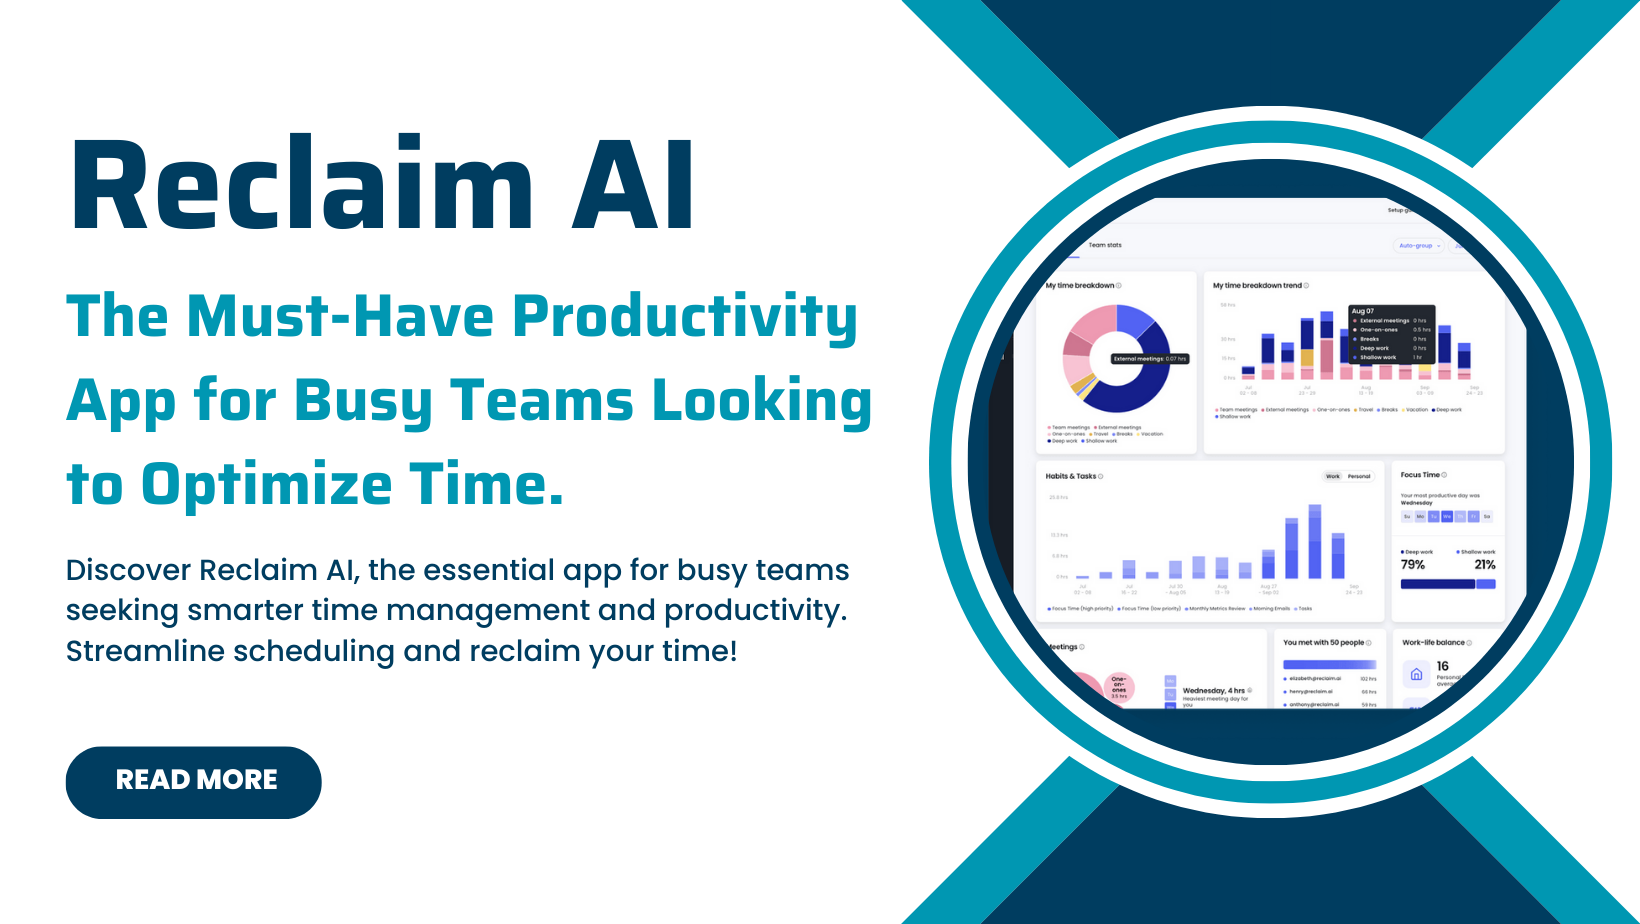 Reclaim AI: The Must-Have Productivity App for Busy Teams Looking to Optimize Time.